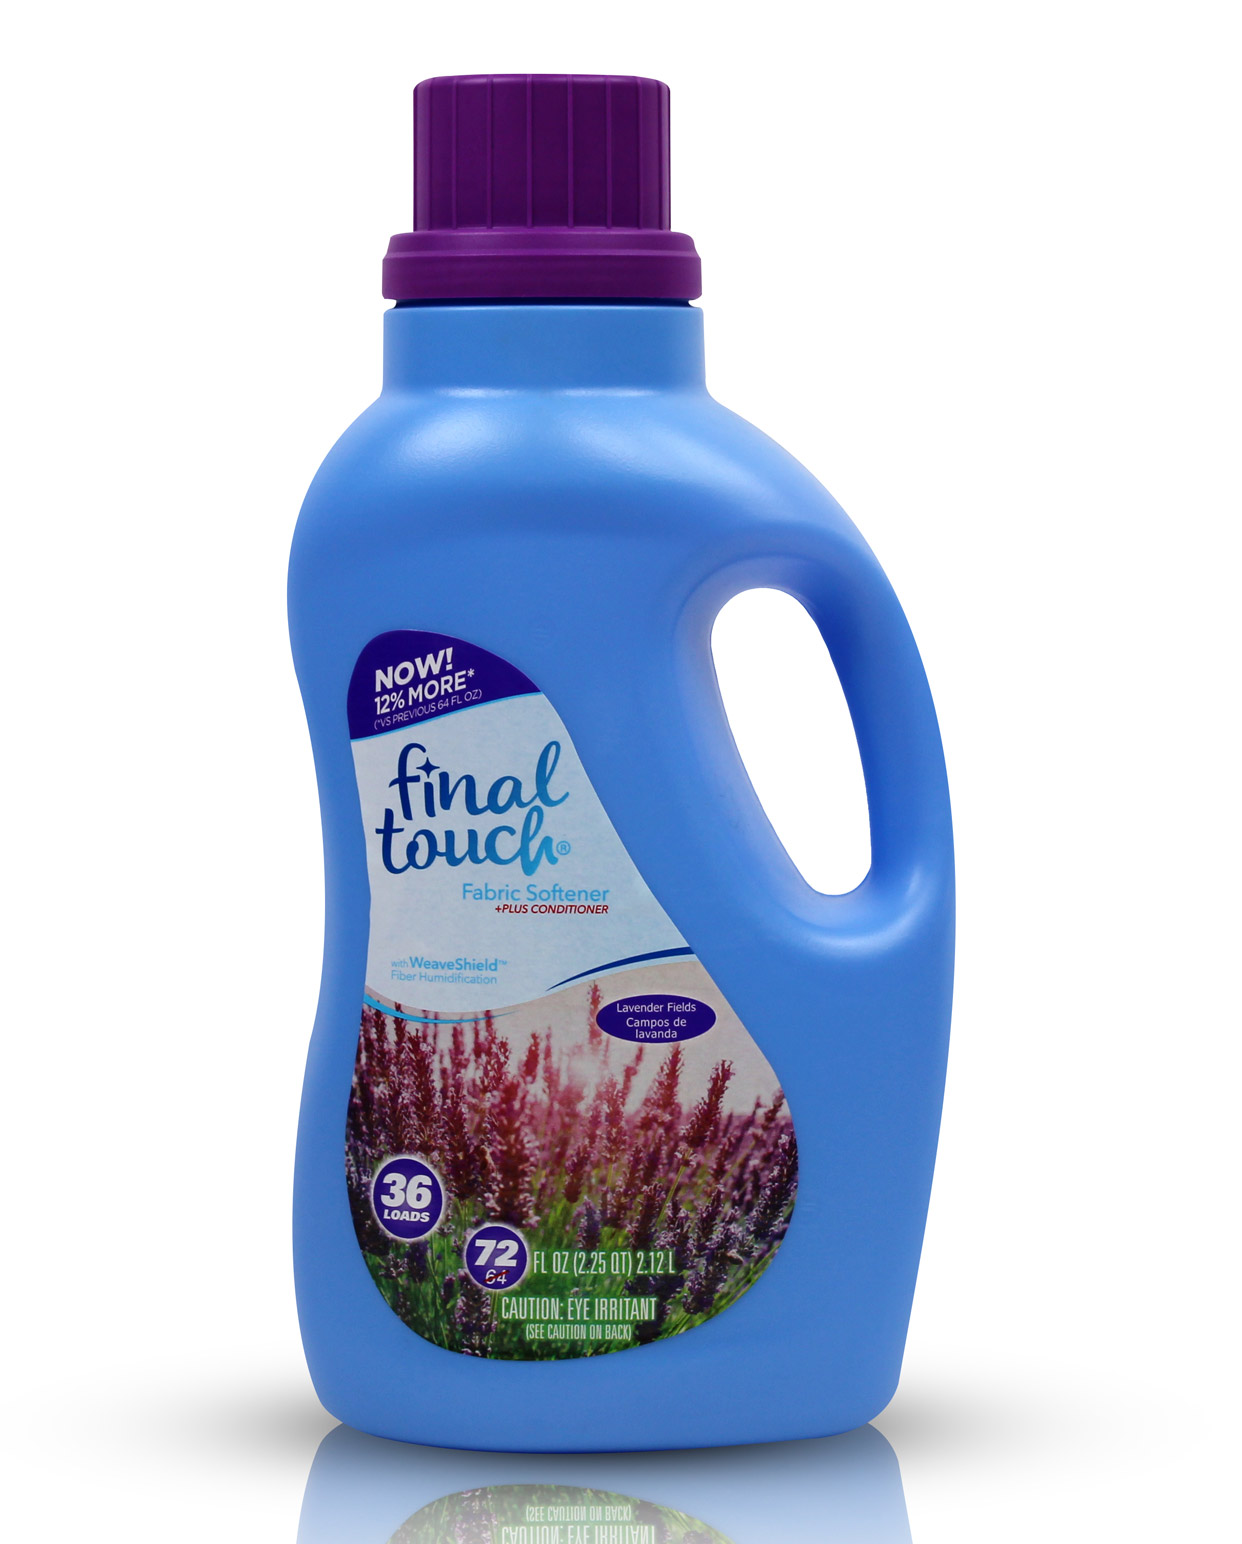 72oz bottle of Scented Fabric Softener with Lavender Scent.